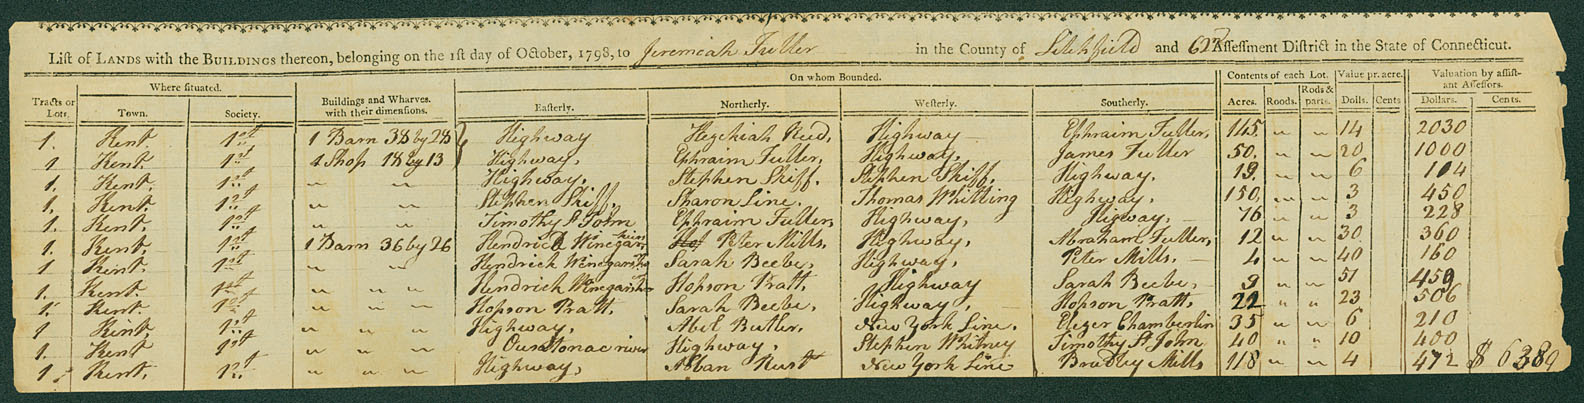 A Particular List submitted by Jeremiah Fuller shows his holdings in land and buildings